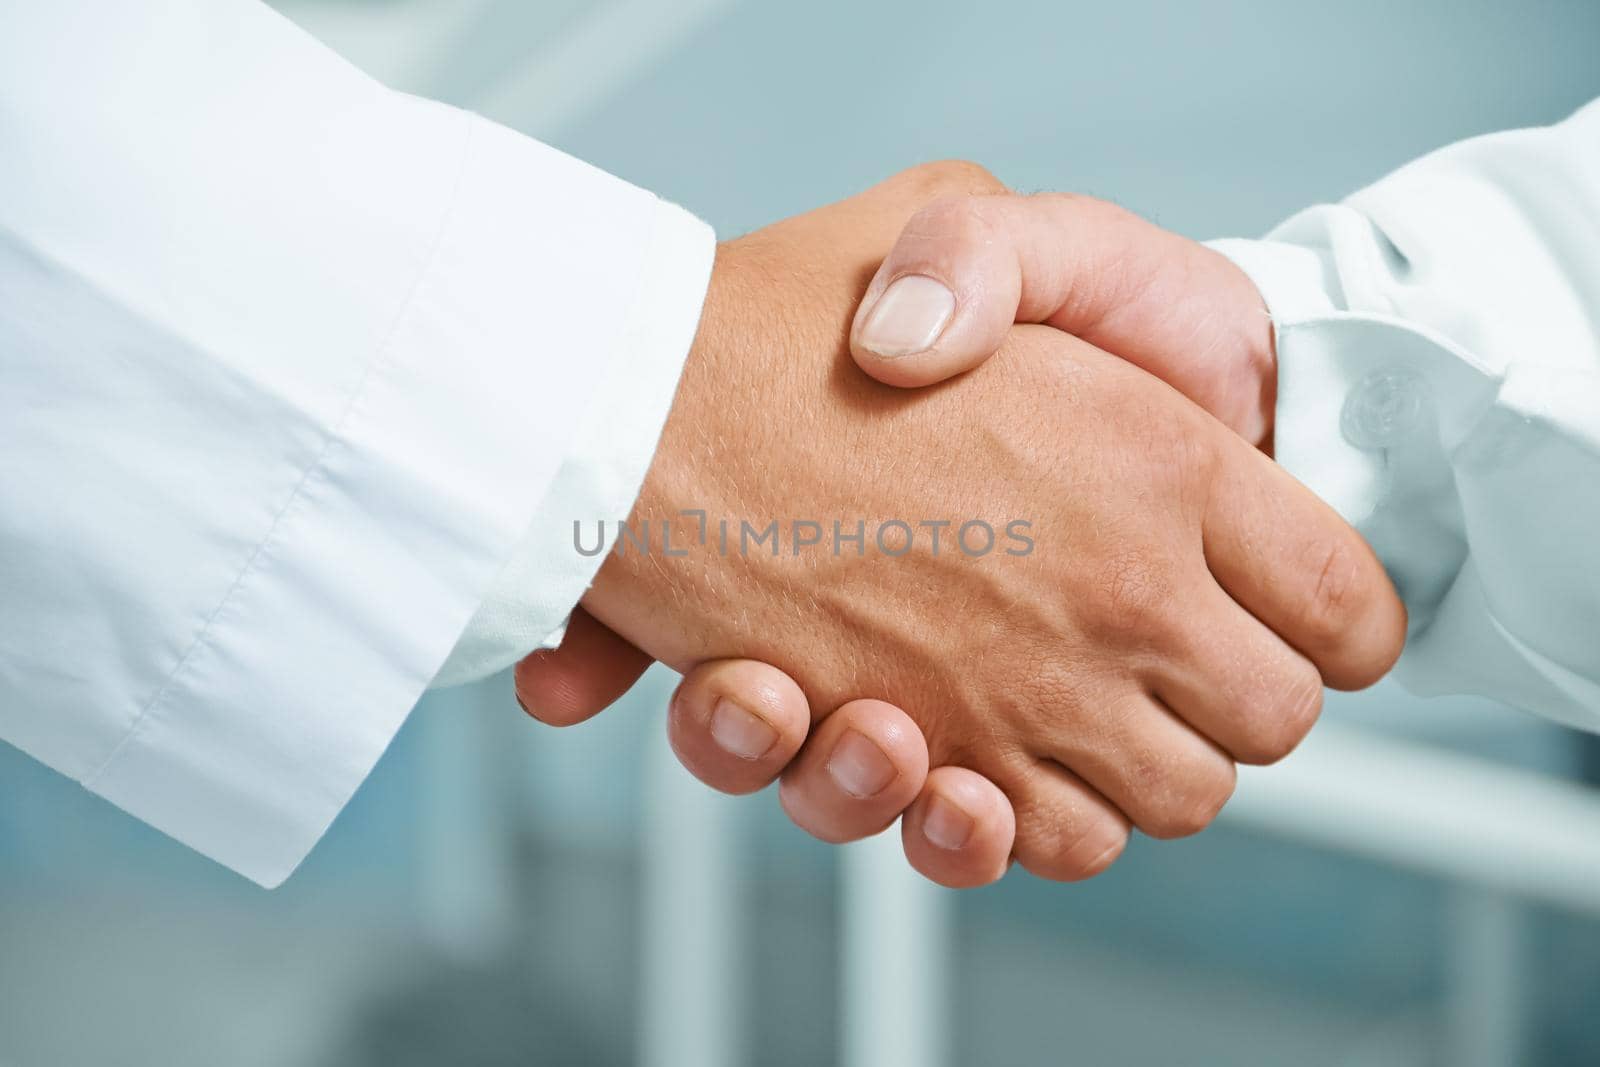 Man doctor shakes hand with another doctor in hospital, concept of teamwork